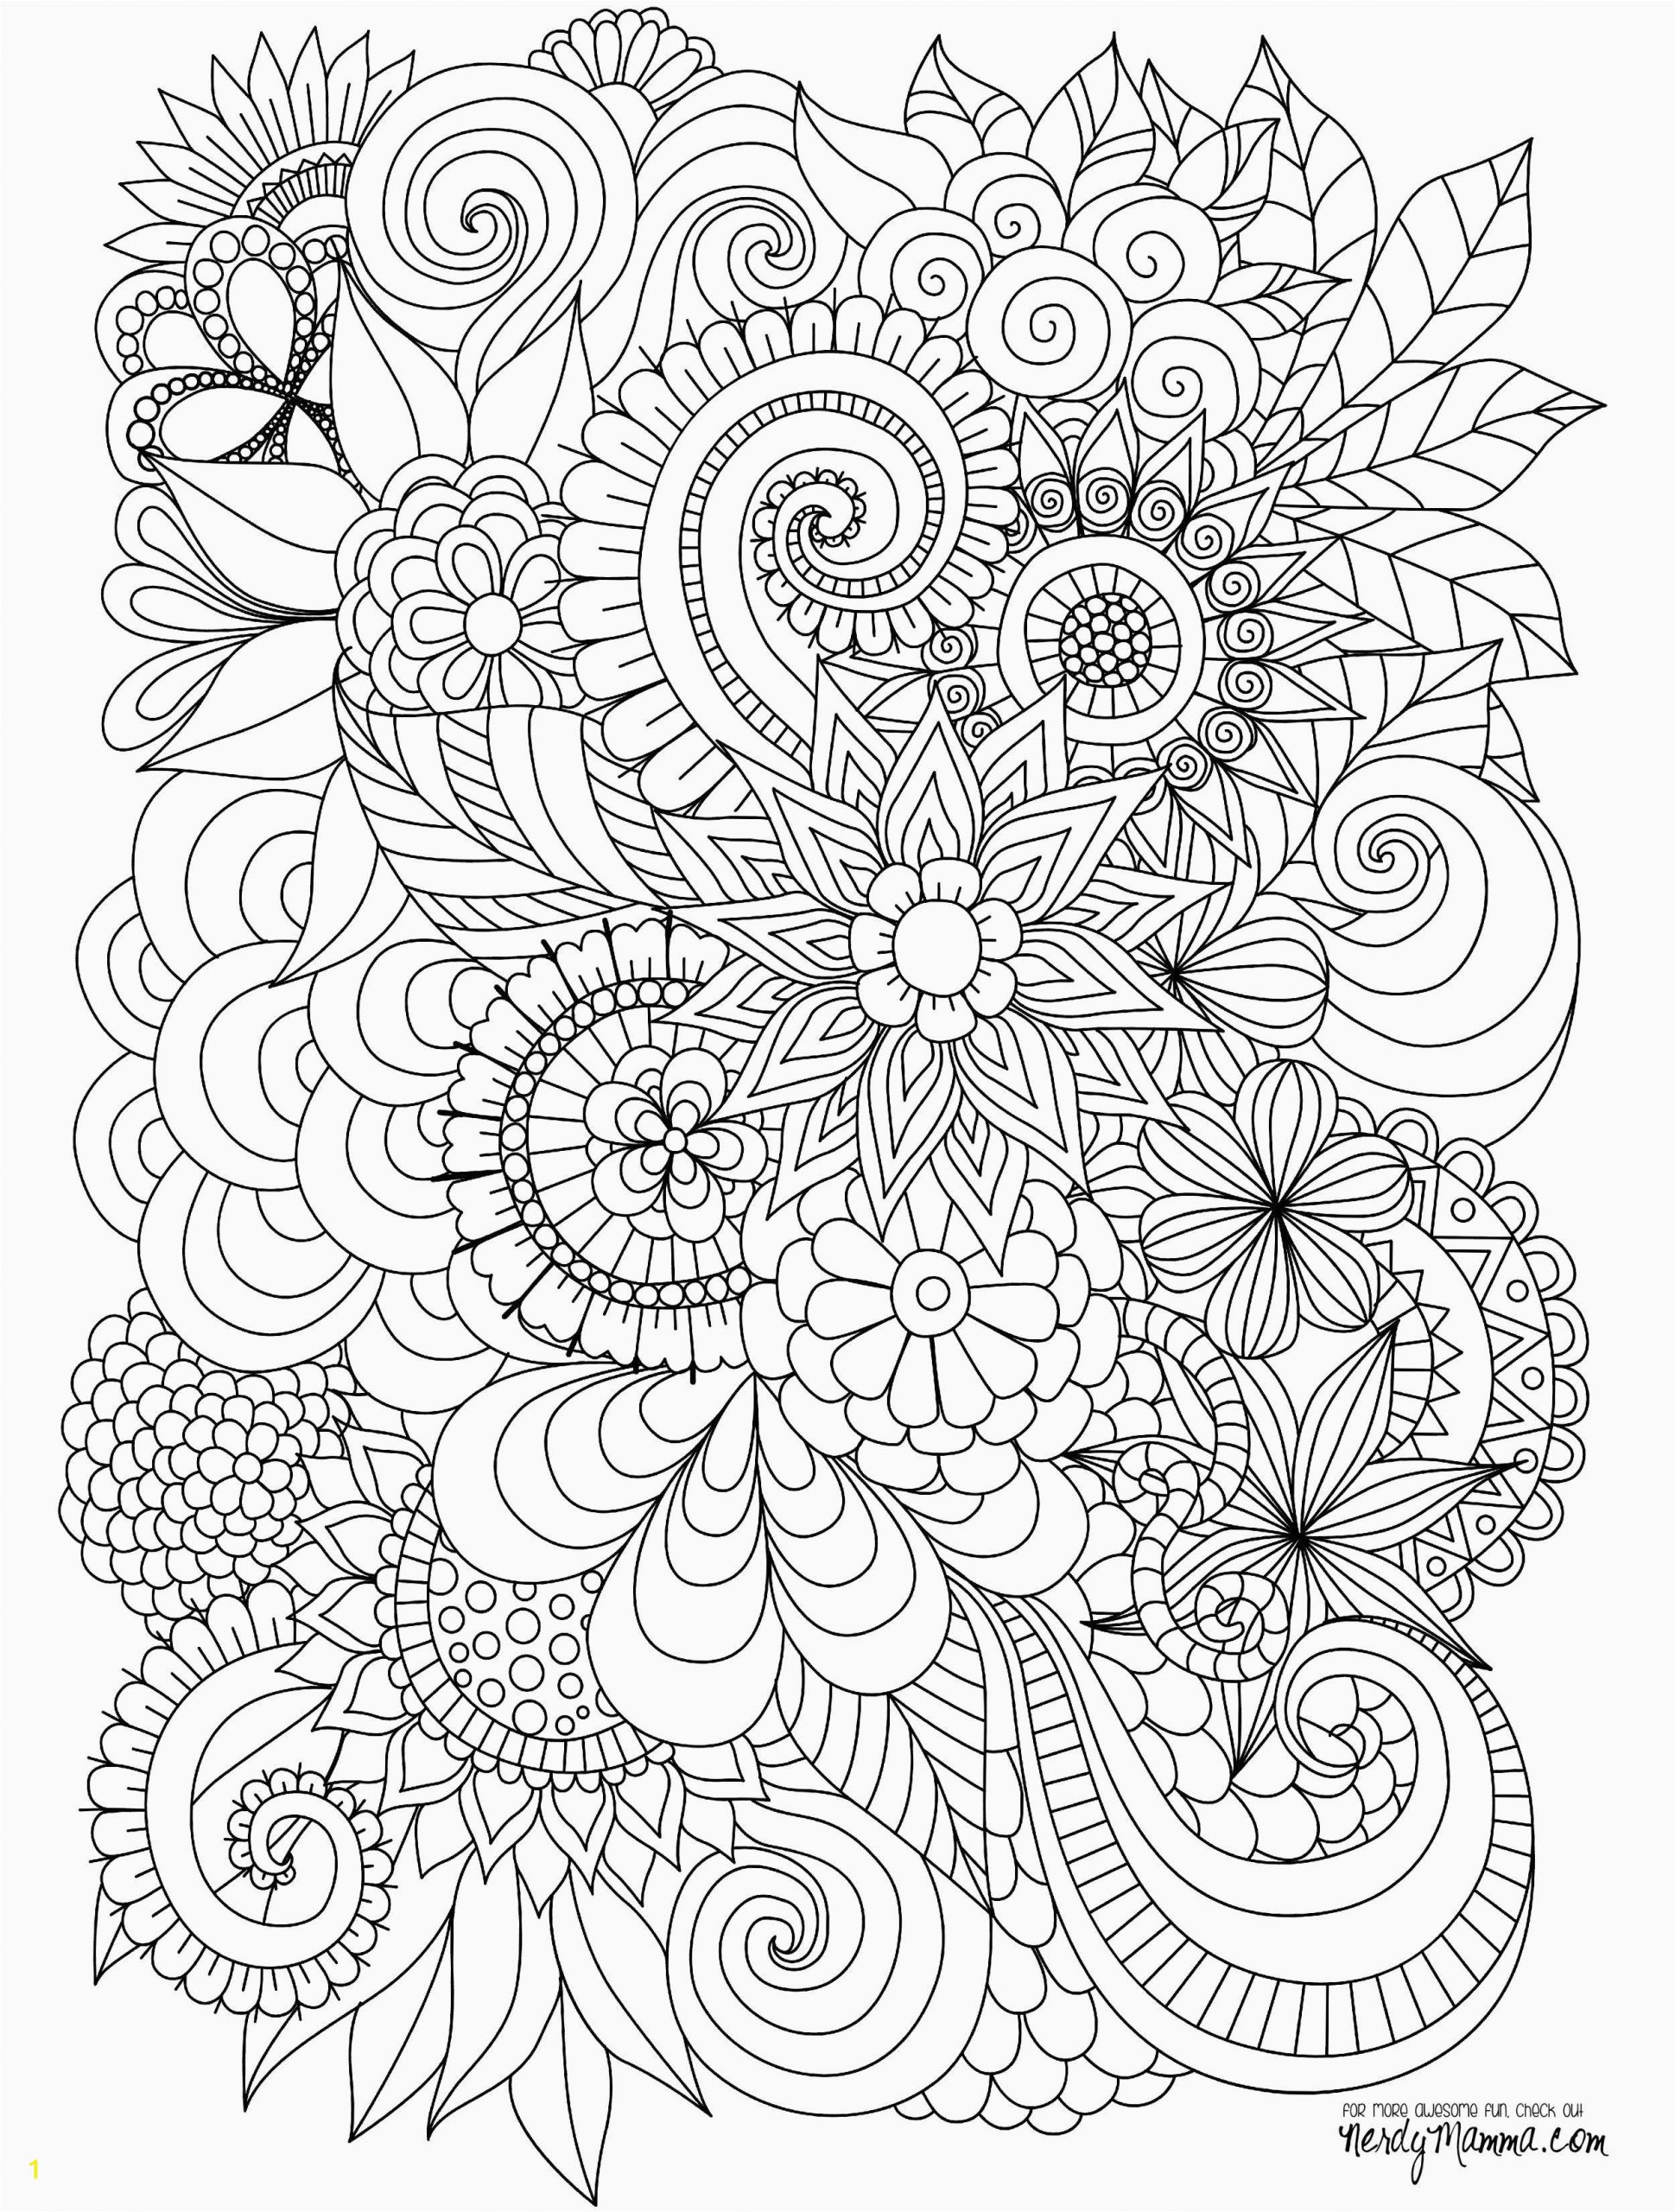 Free Sunflower Coloring Pages for Adults Intricate Coloring Pages for Adults Lovely Flowers Abstract